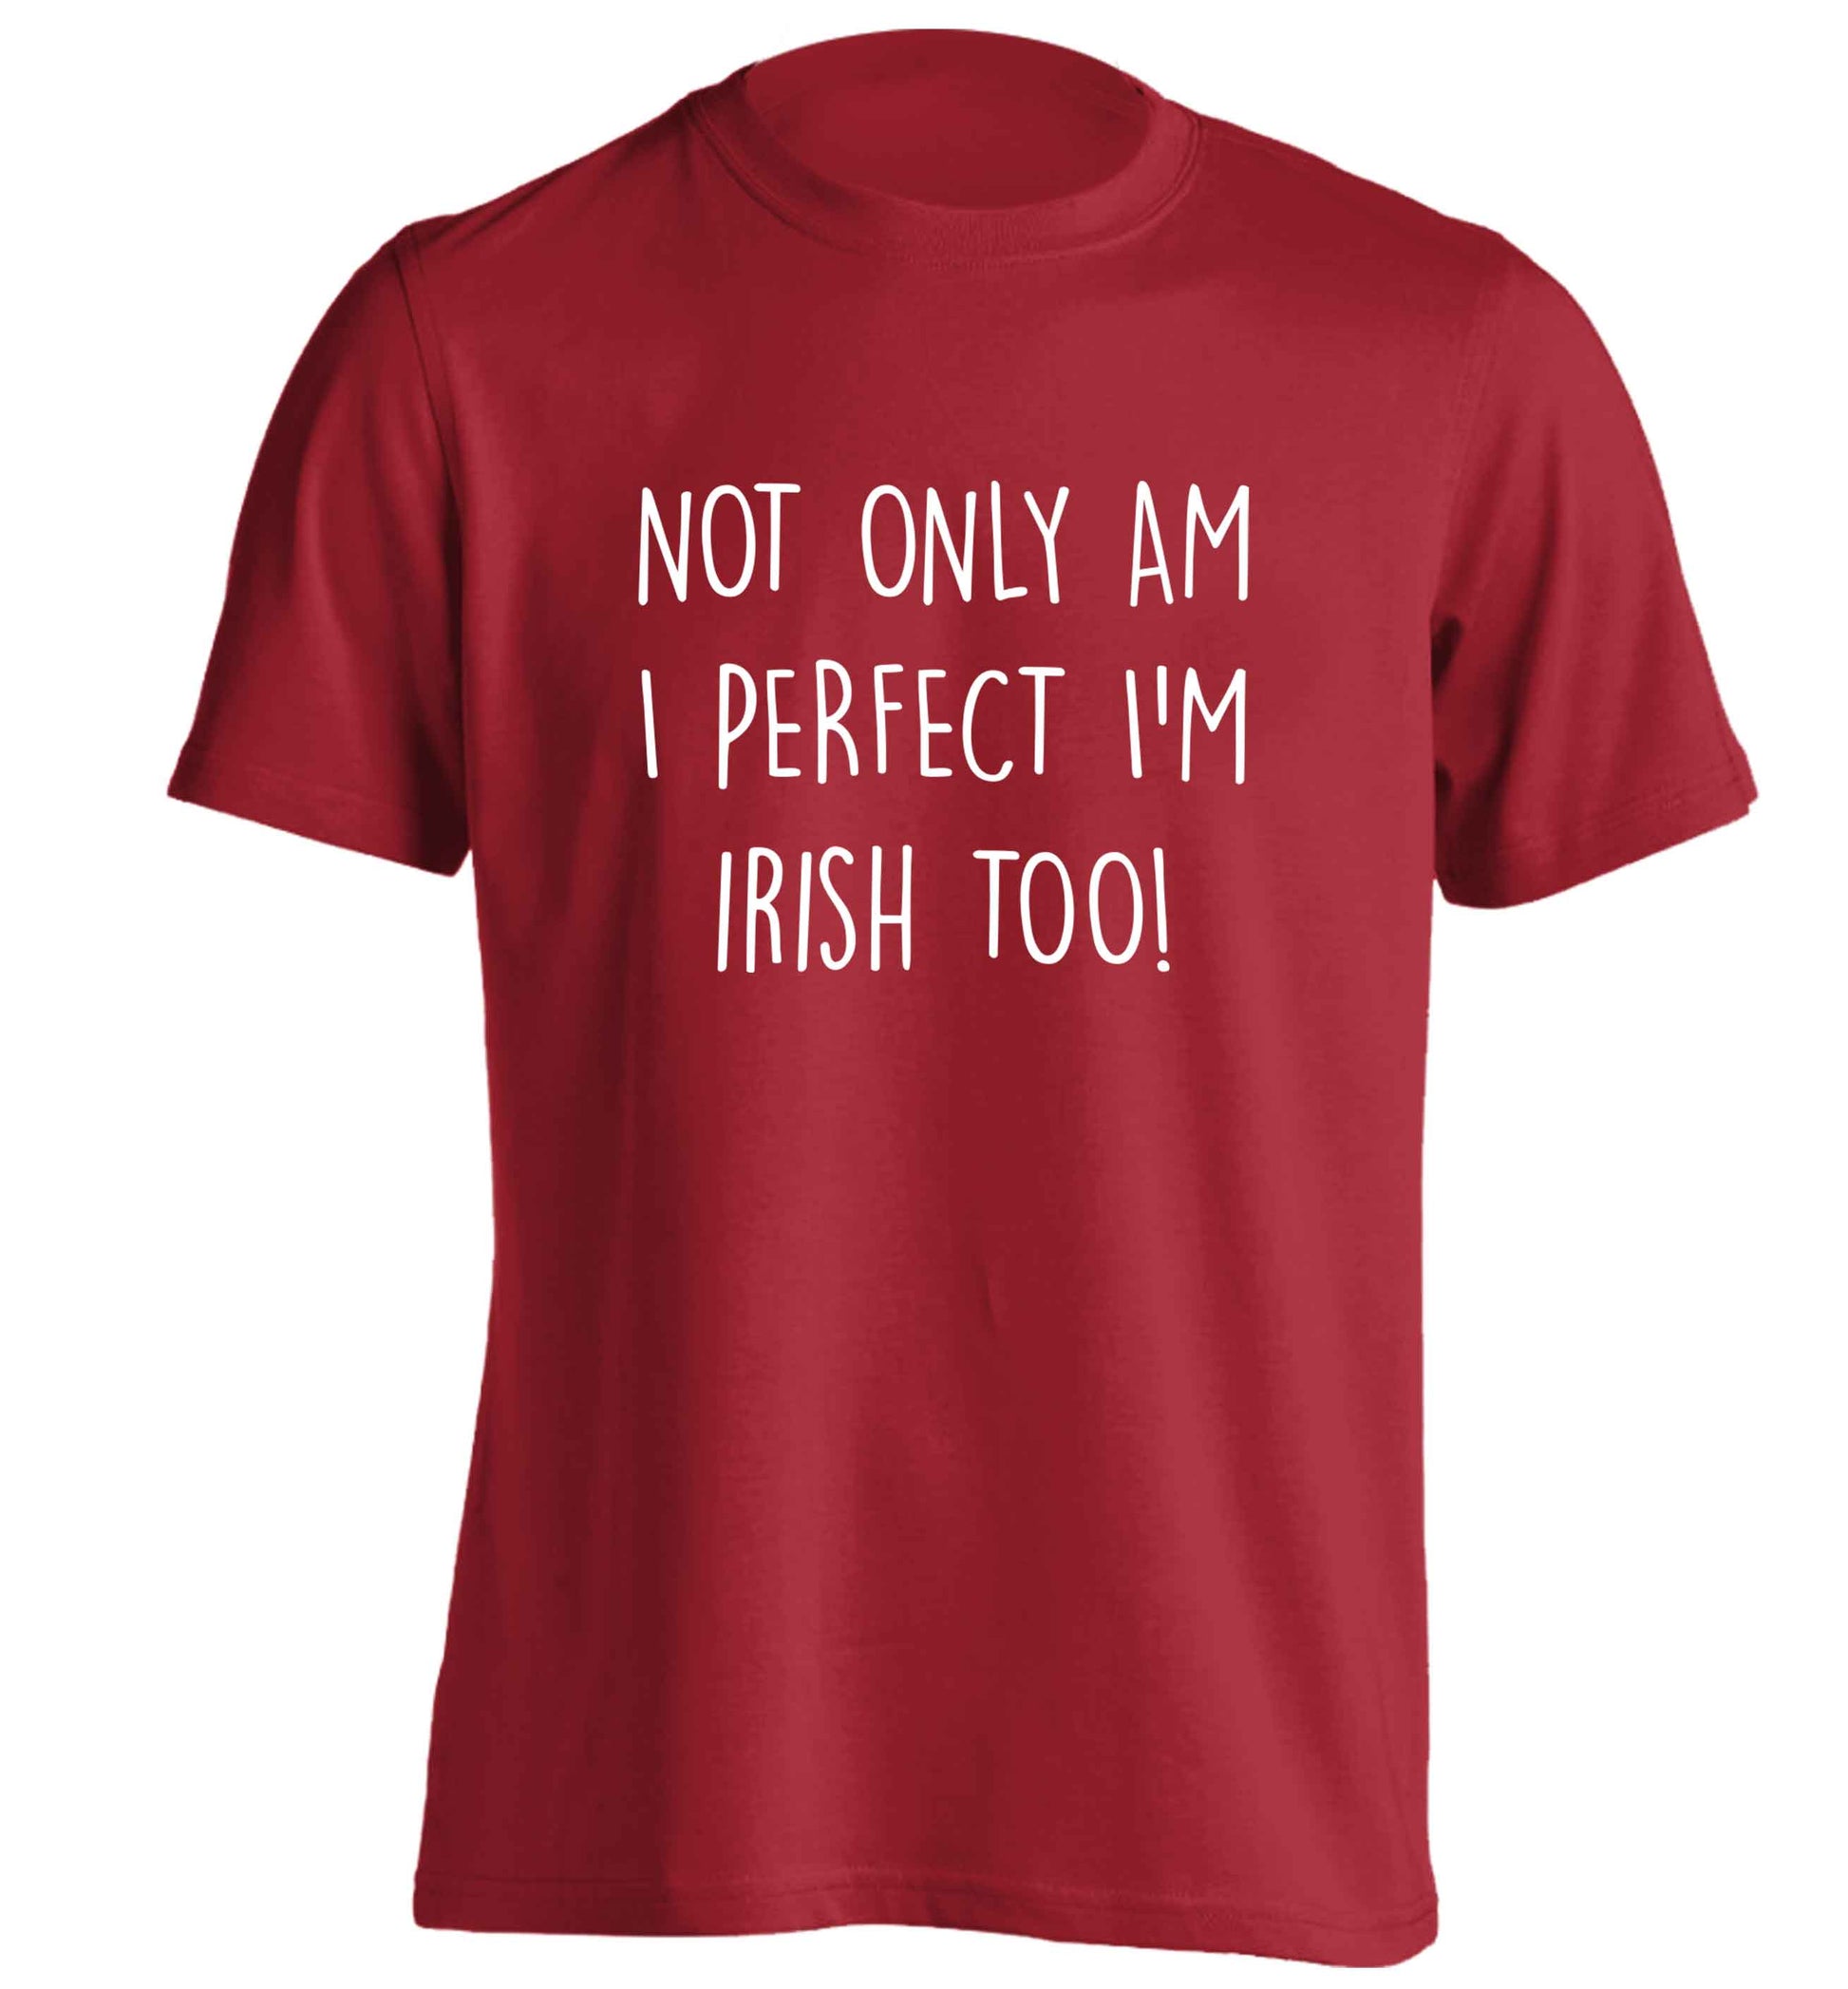 Not only am I perfect I'm Irish too! adults unisex red Tshirt 2XL